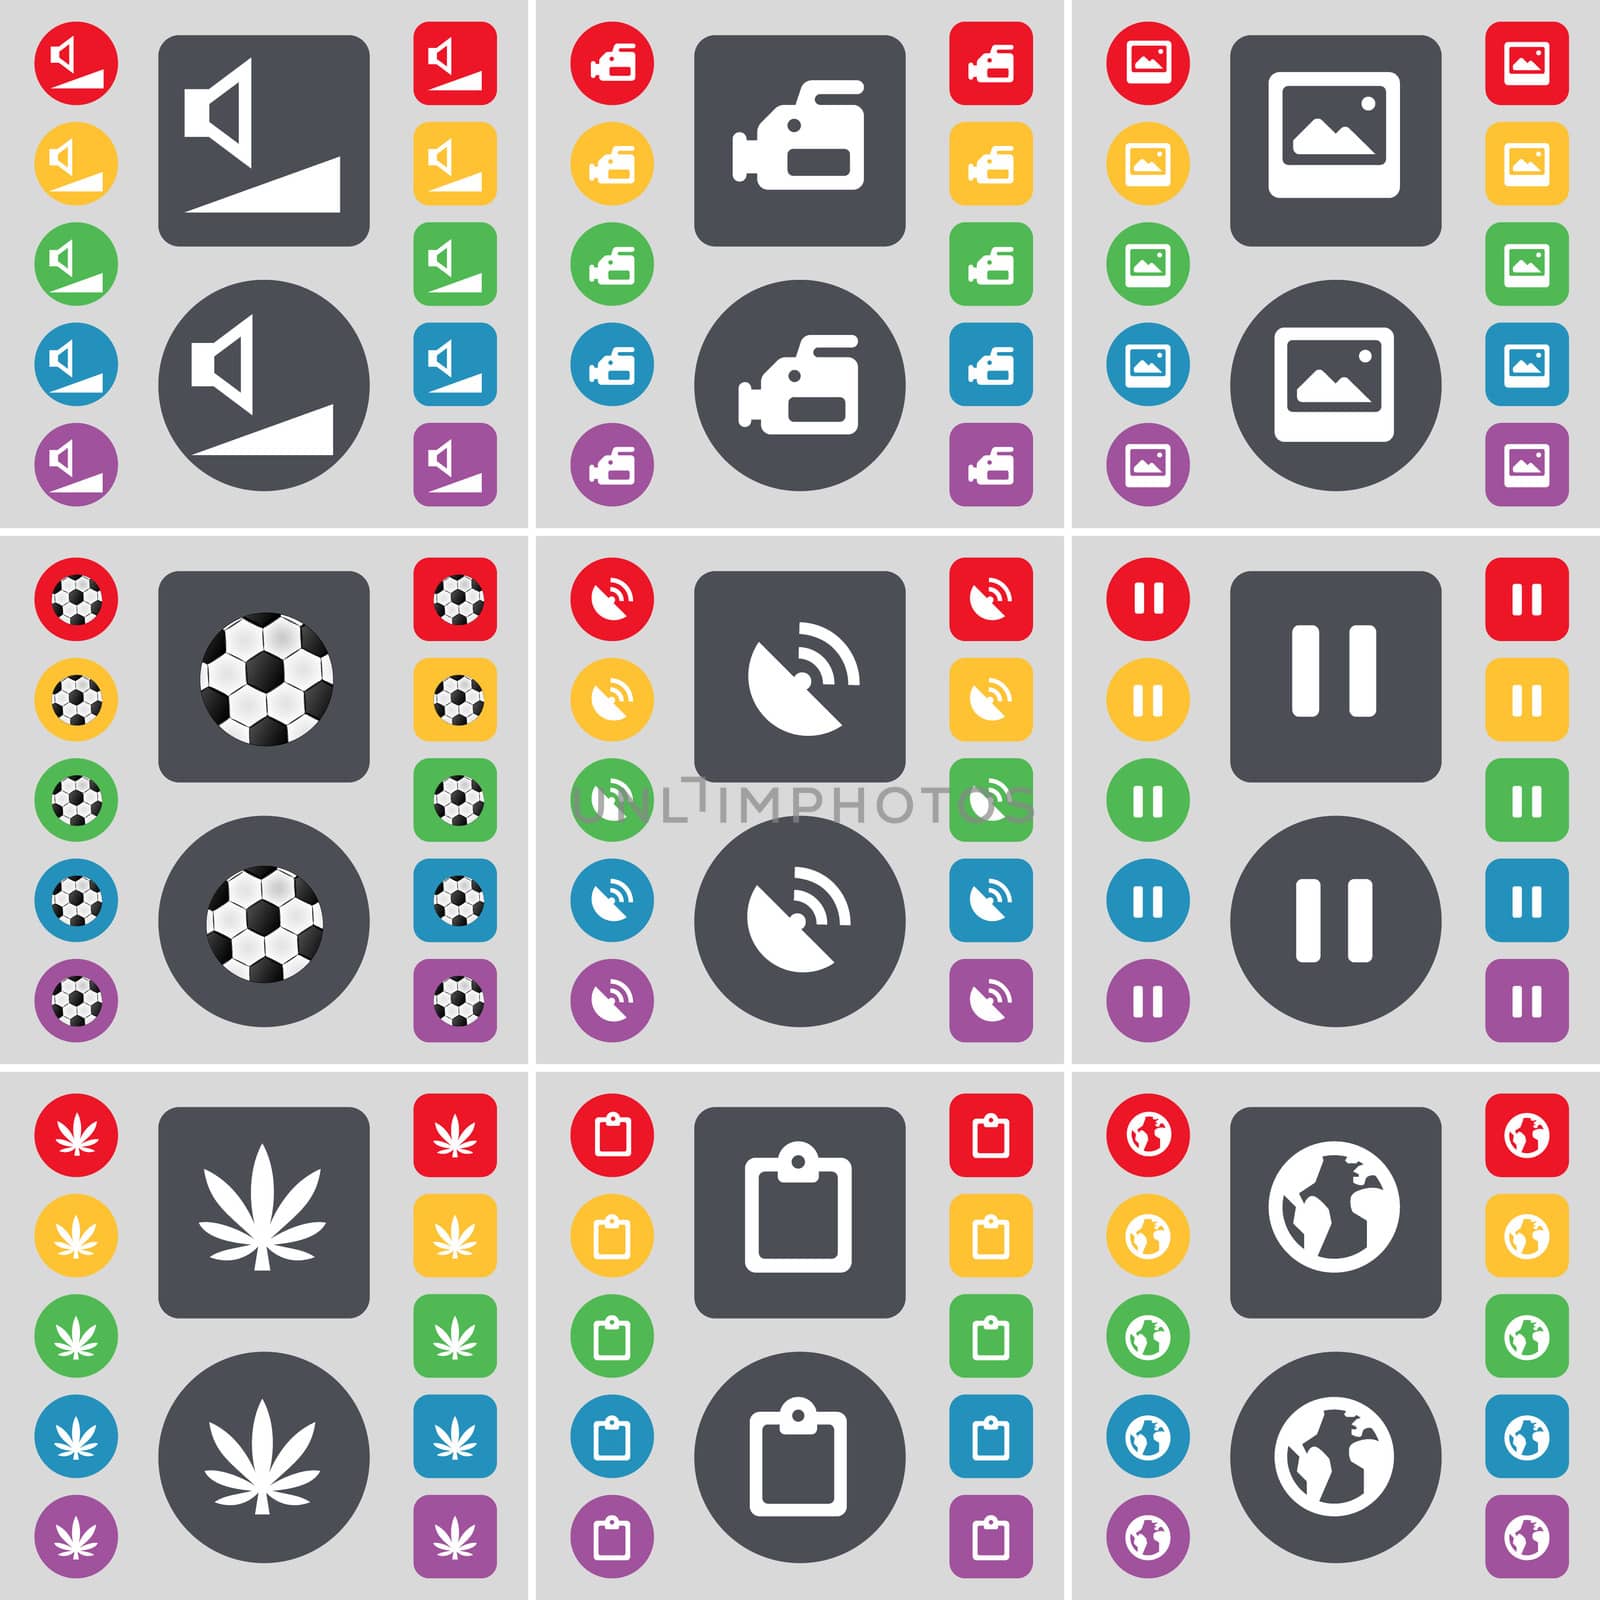 Volume, Film camera, Picture, Ball, Satellite dish, Pause, Marijuana, Survey, Planet icon symbol. A large set of flat, colored buttons for your design. illustration